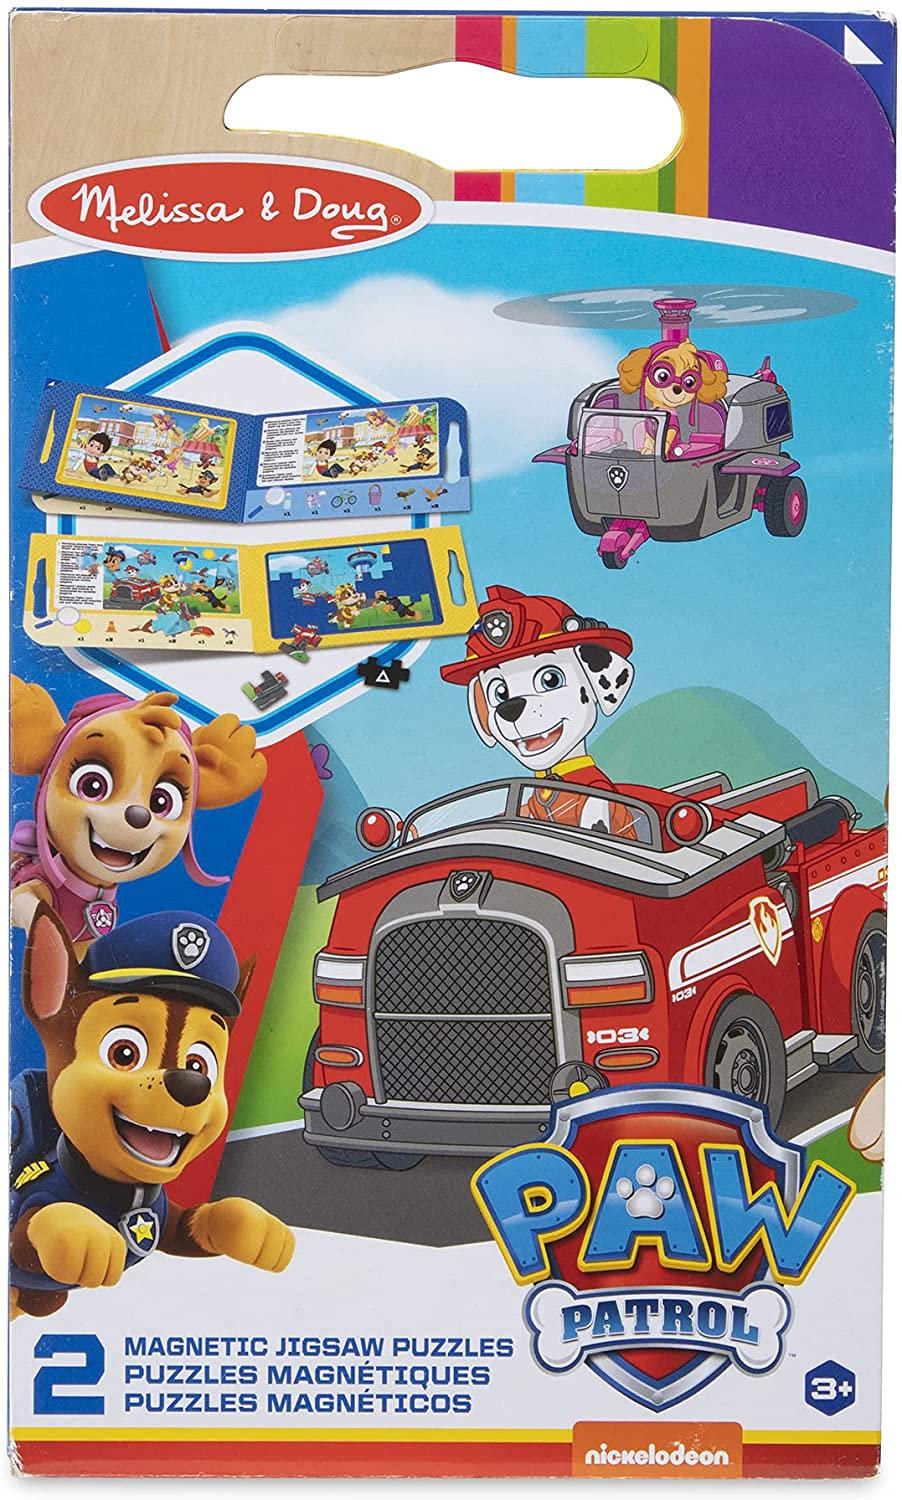 Melissa & Doug Magnetic Jigsaw Puzzles Paw Patrol Toys, 2-Pack